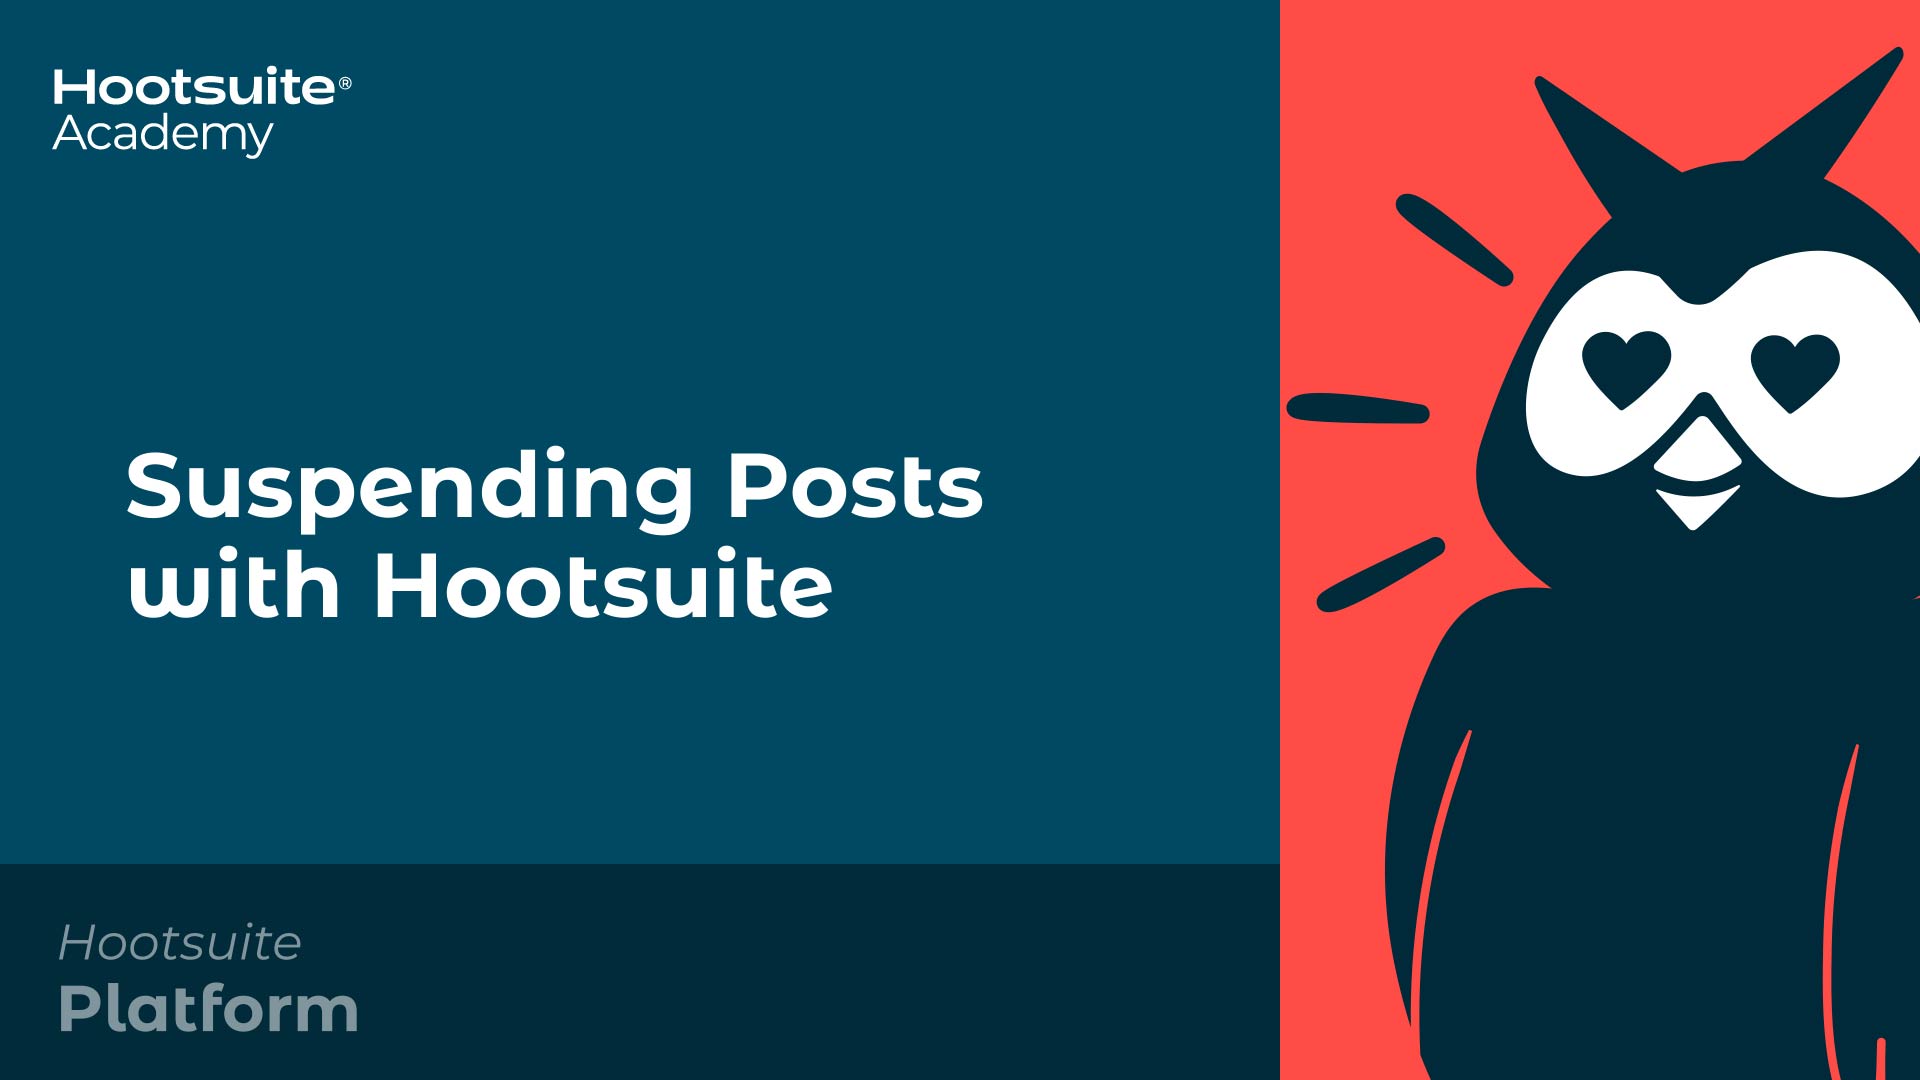 Video: Suspending posts with Hootsuite.